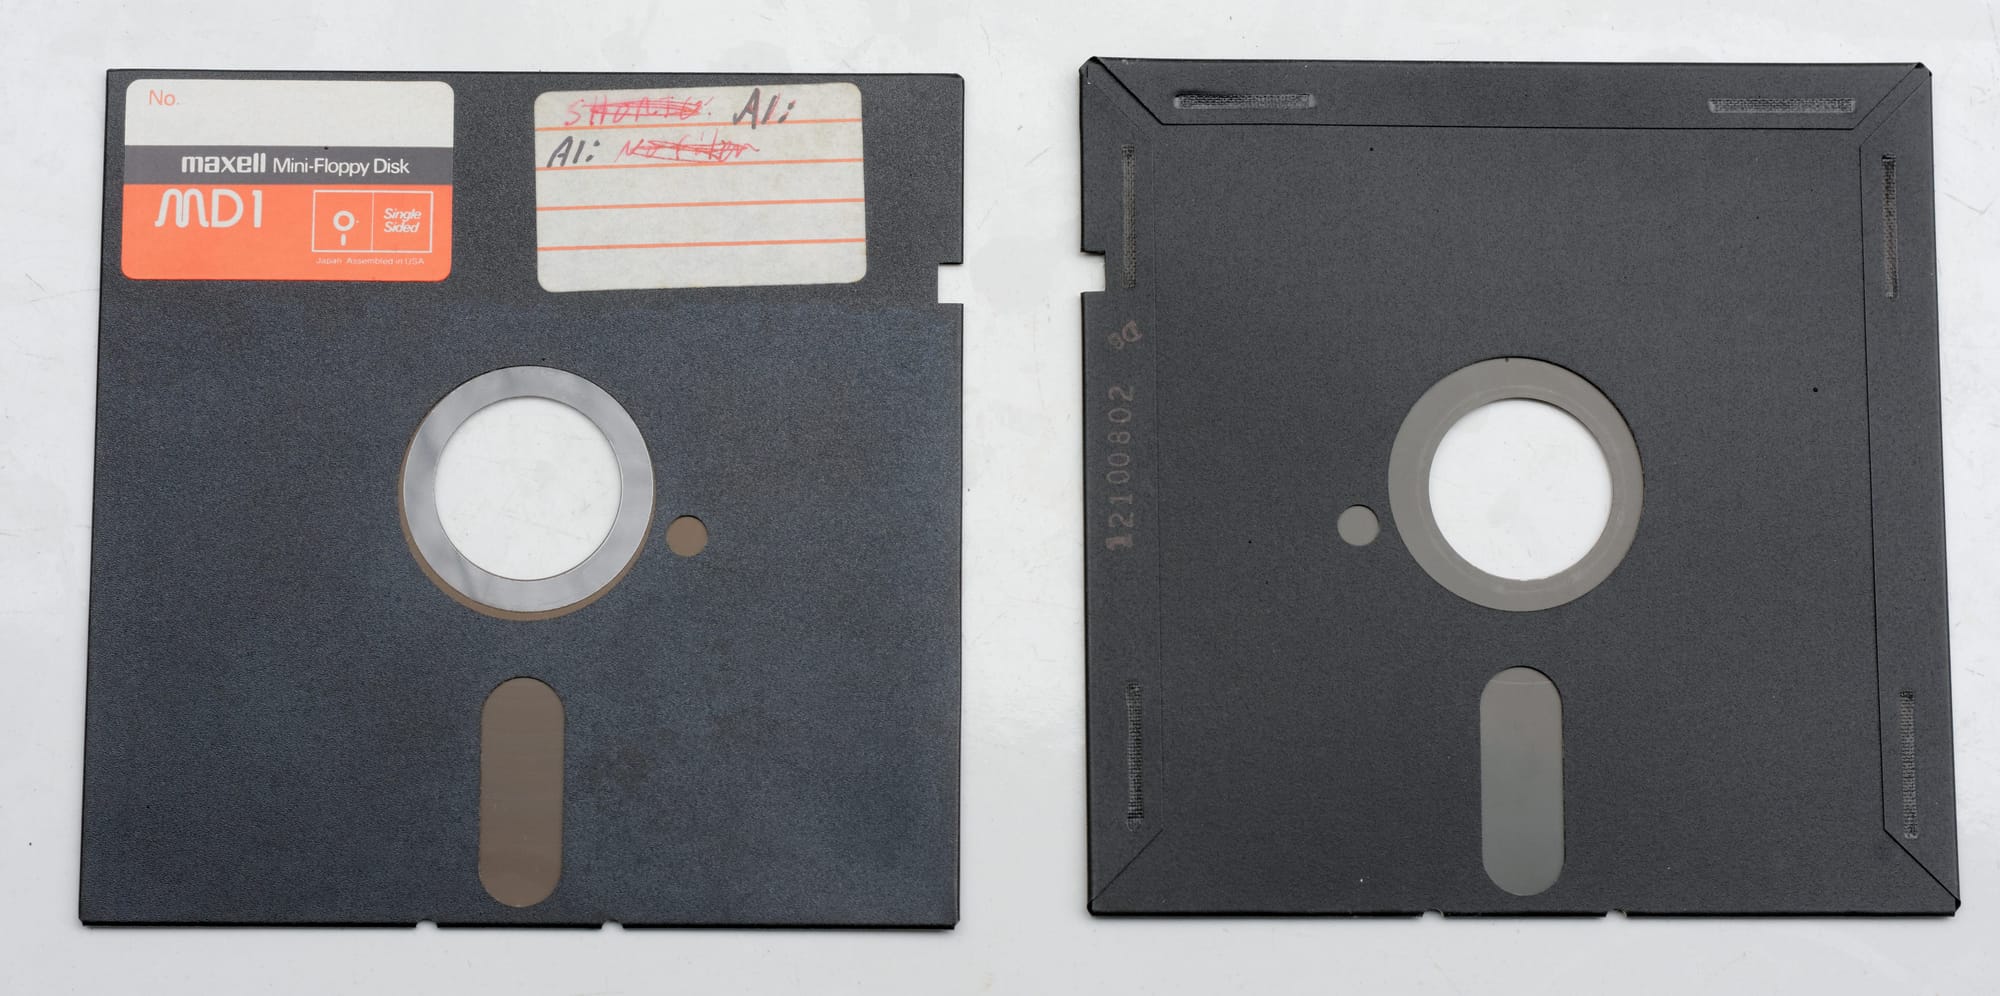 Front and back of a 5 1/4 inch floppy disk